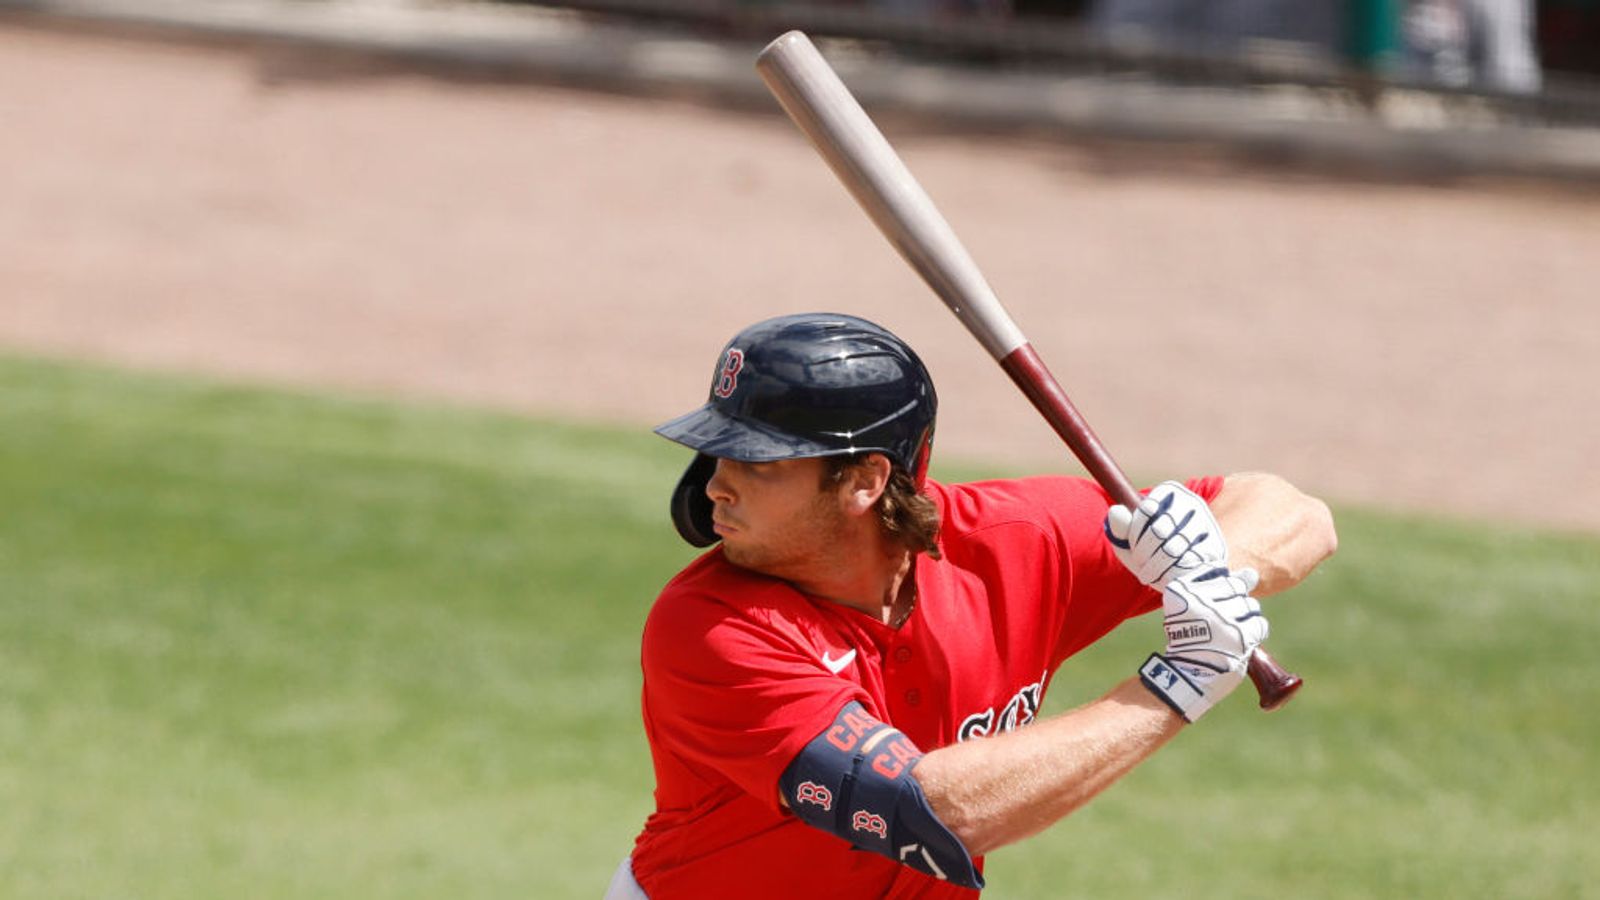 MLB Notebook Red Sox minor leaguers to watch; keys to avoiding injuries; end of Pujols era